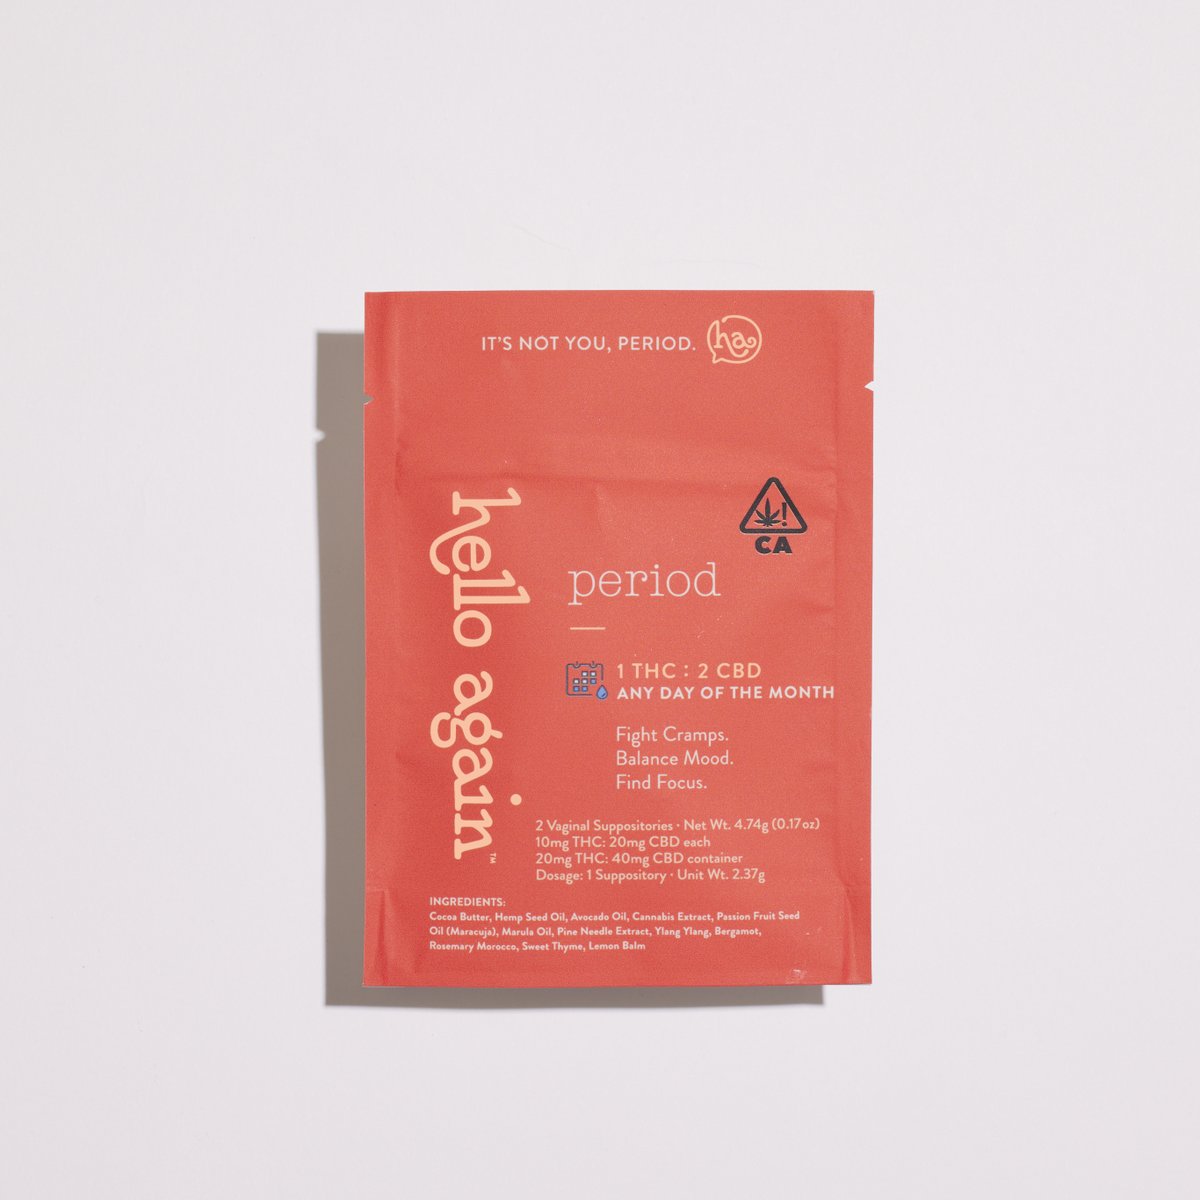 These Hello Again vaginal suppositories are your secret weapon against PMS woes. Infused with cannabis and other natural botanicals, they're here to soothe and support your cycle naturally! 🌸 #FeminineWellness #WomenAndWeed  #PeriodPainRelief #EmpowerHer